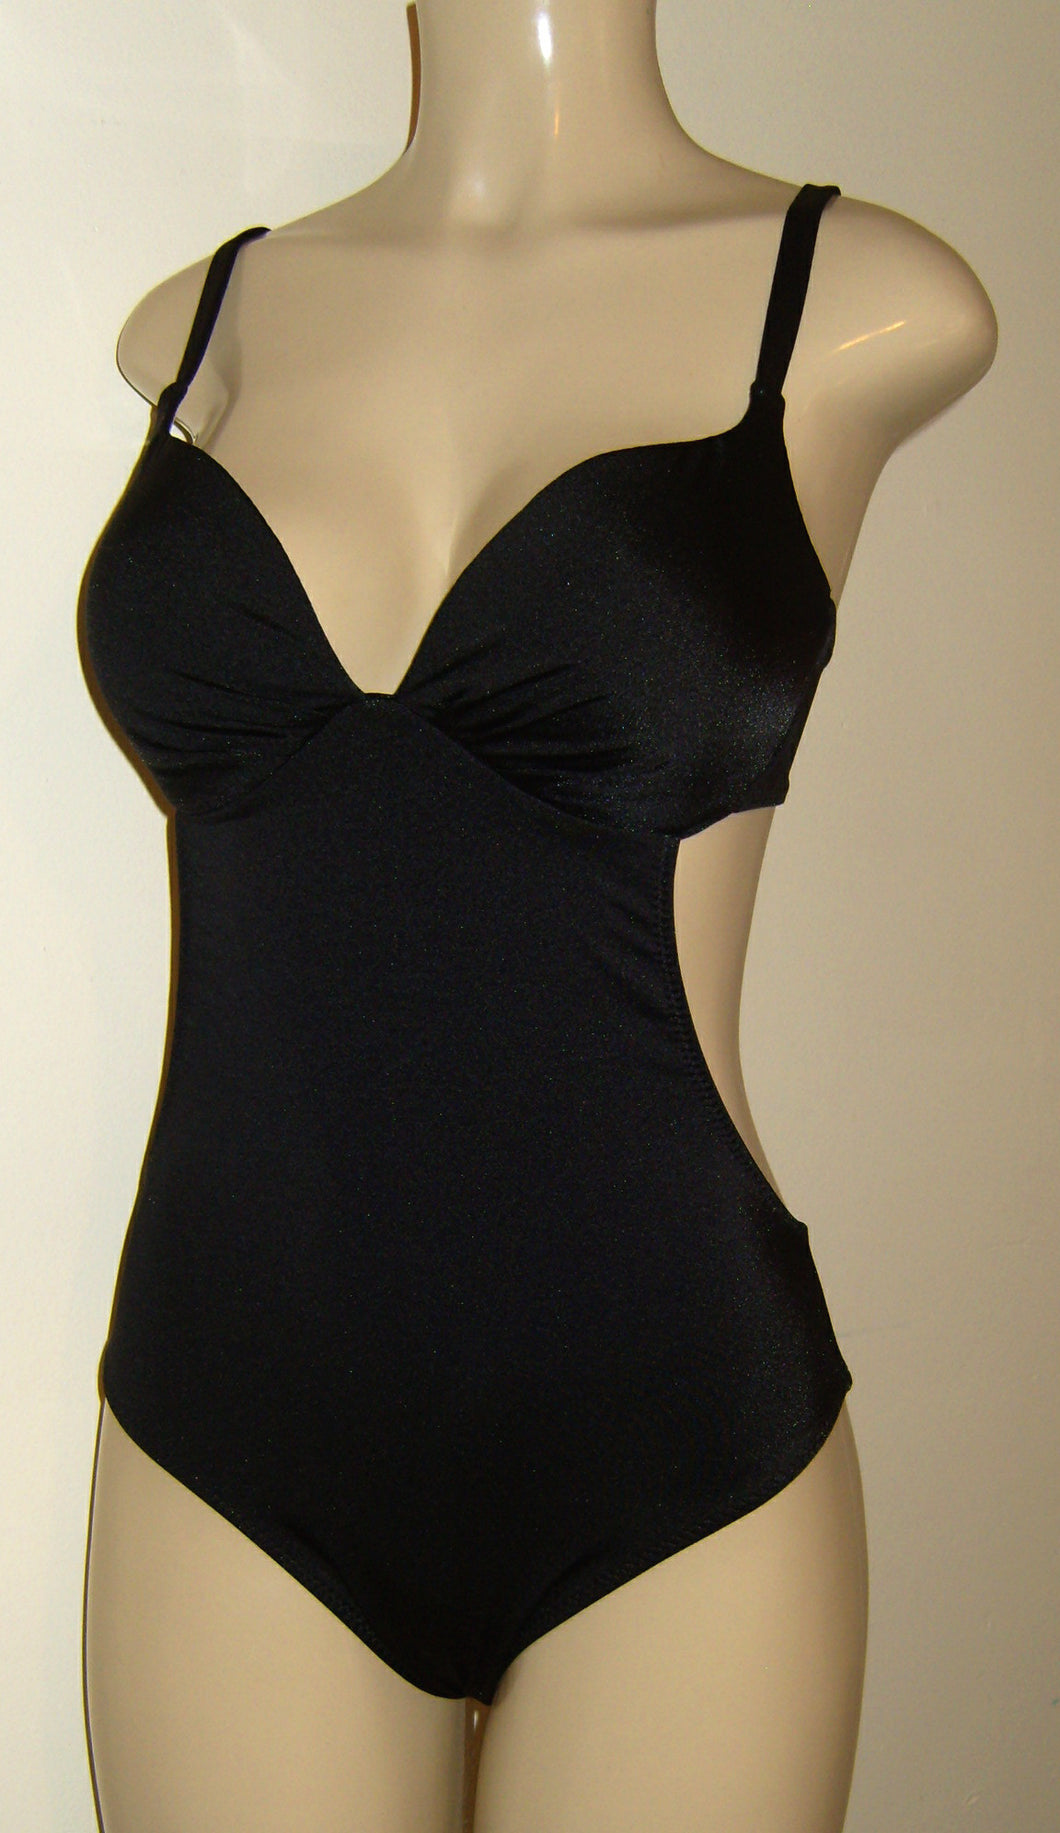 One piece bathing suits with underwire support. Custom torso swimsuits